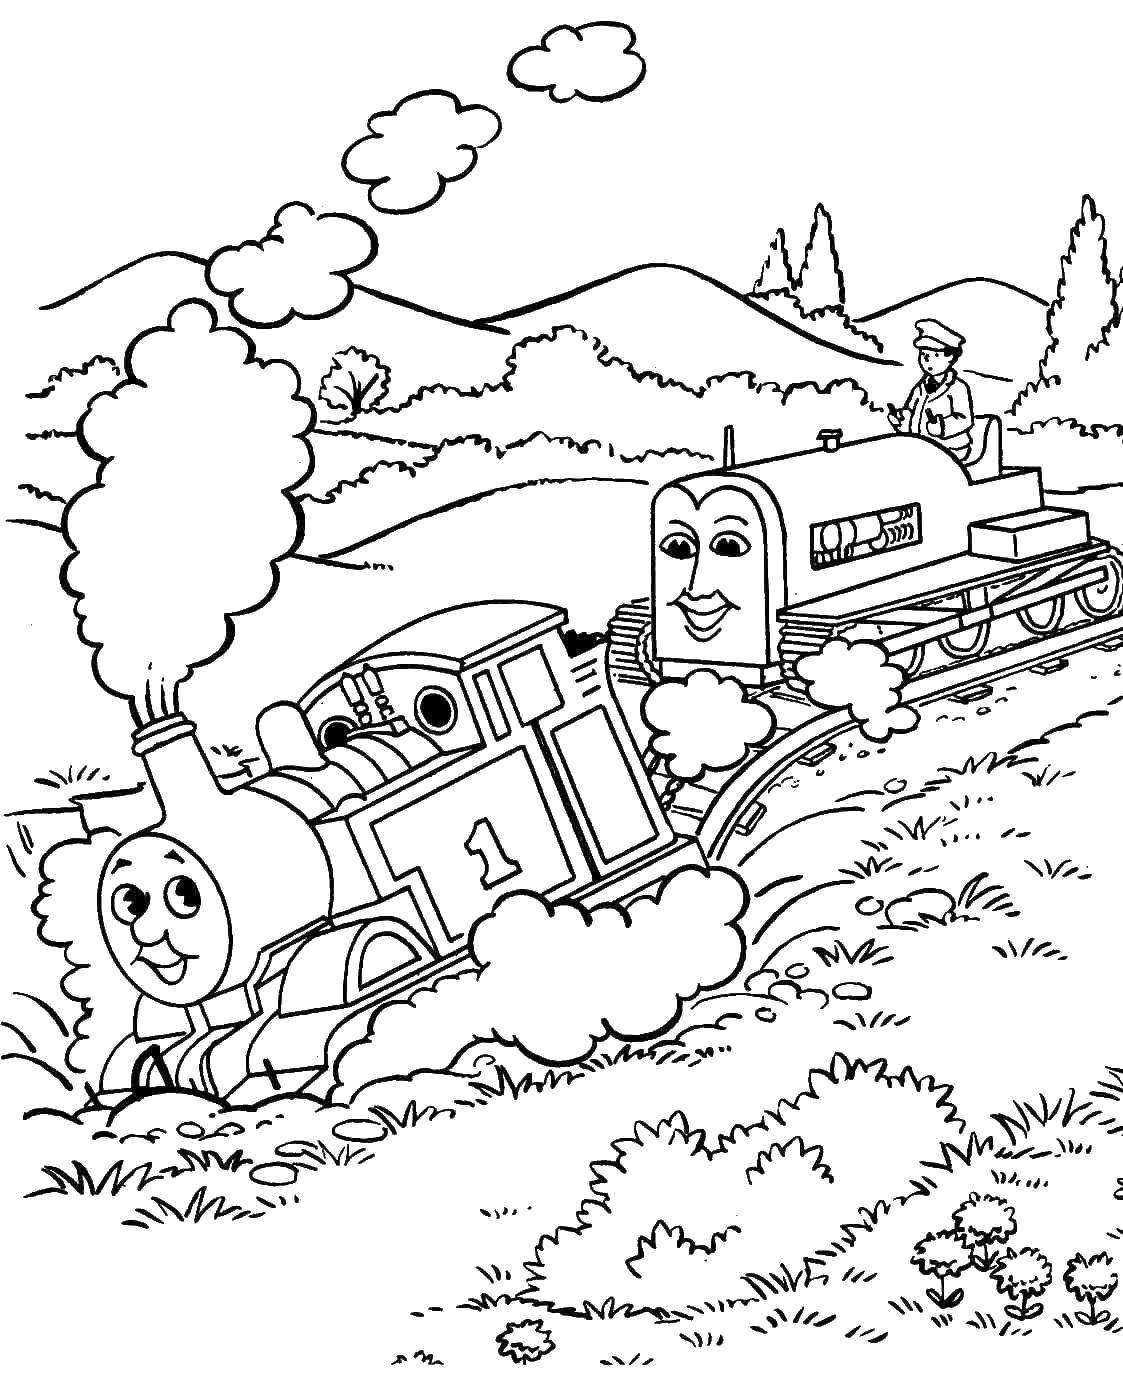 Coloring Thomas the tank engine and other train. Category train. Tags:  Train, Thomas.